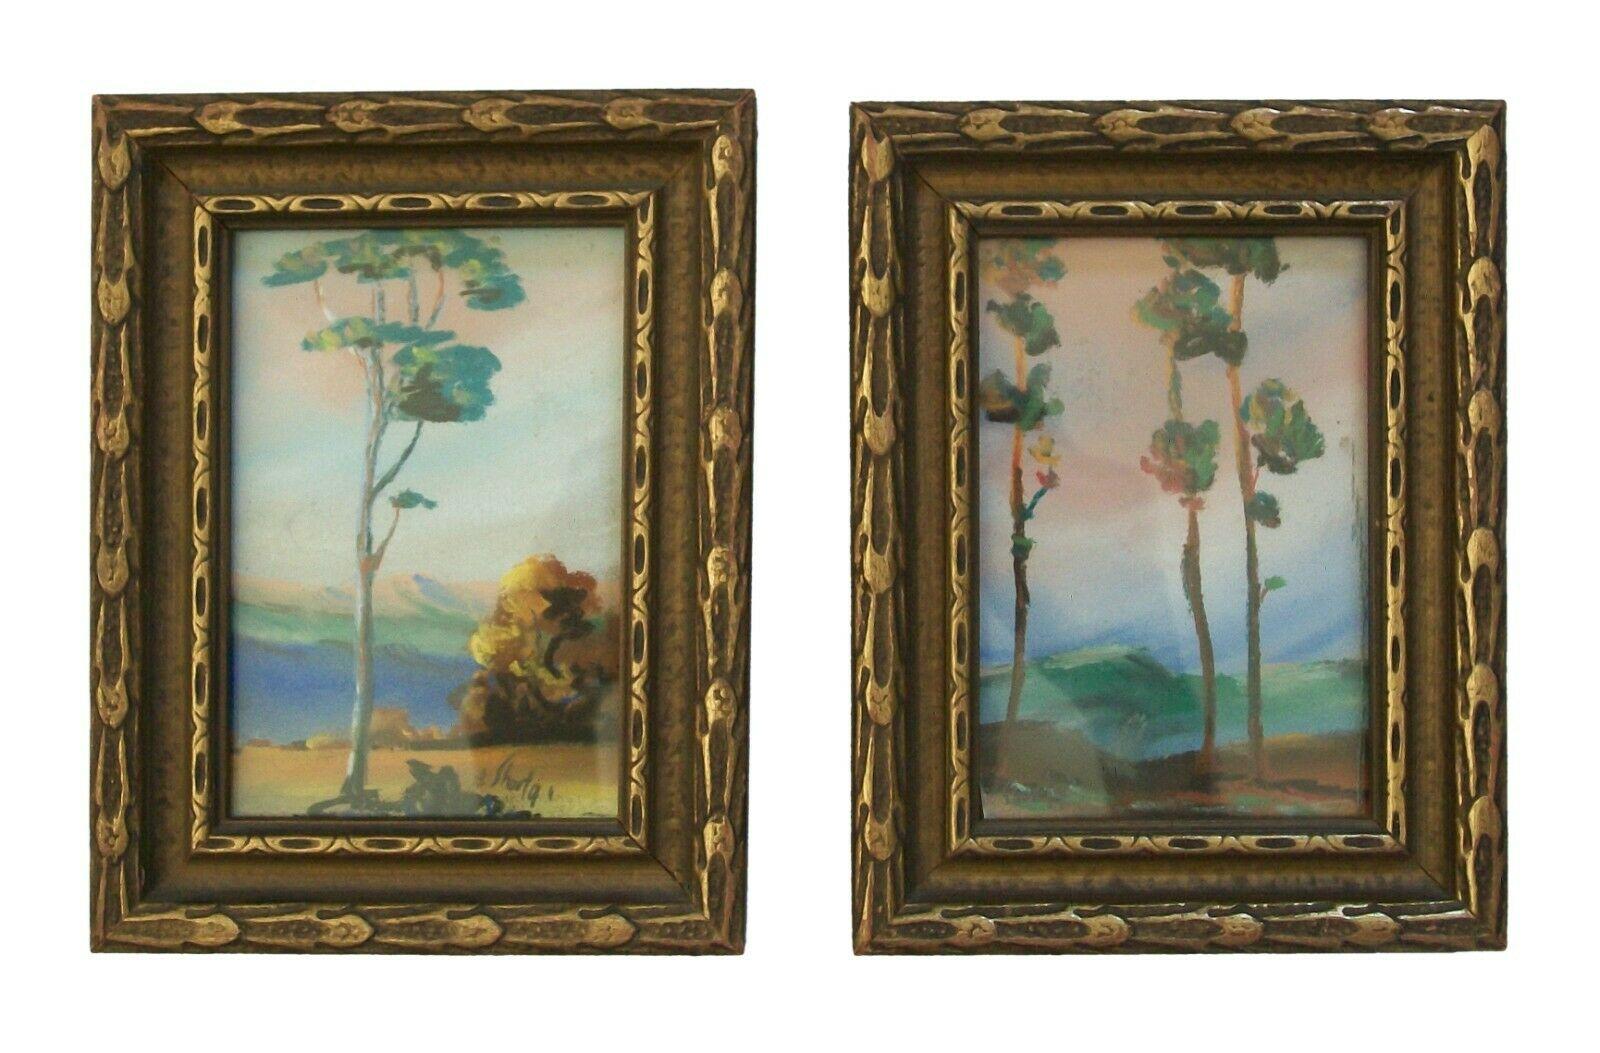 California Eucalyptus school pair of miniature framed Impressionist landscape paintings - painted in watercolor and gouache on paper (applied to board) - featuring Eucalyptus trees in the foreground set against pink and blue skies with mountains in